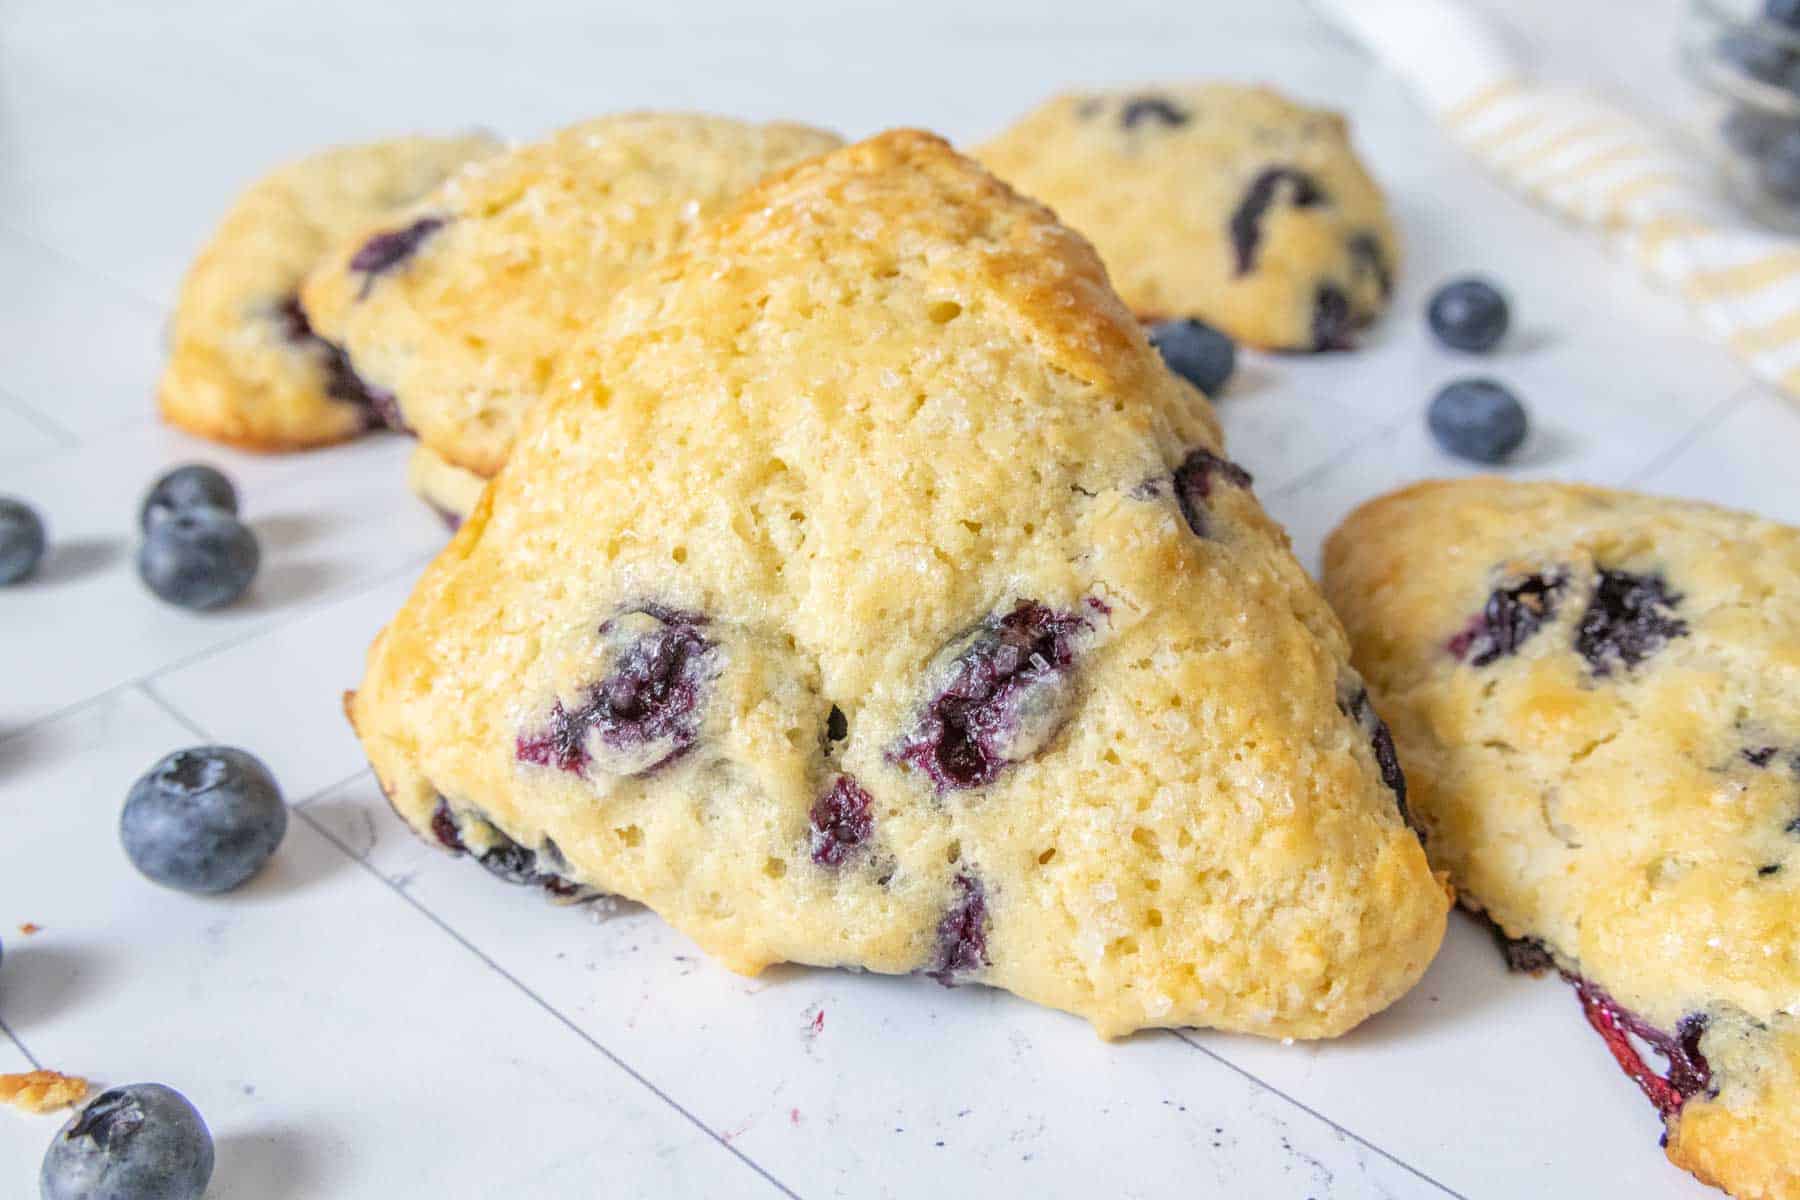 Blueberry scones on a tile surface.